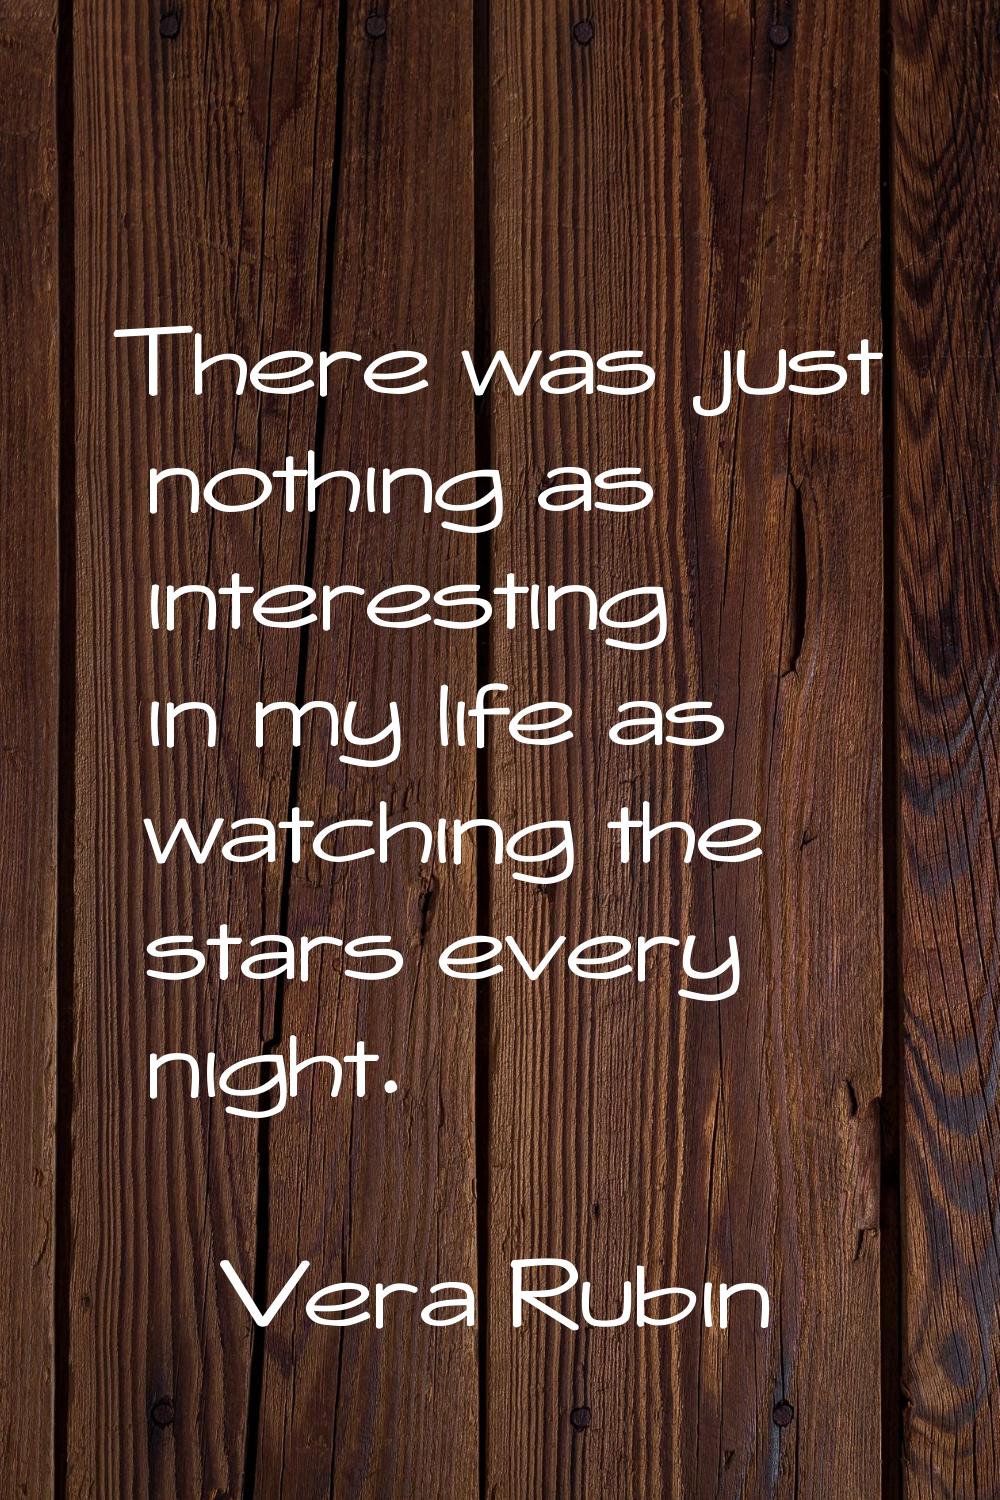 There was just nothing as interesting in my life as watching the stars every night.